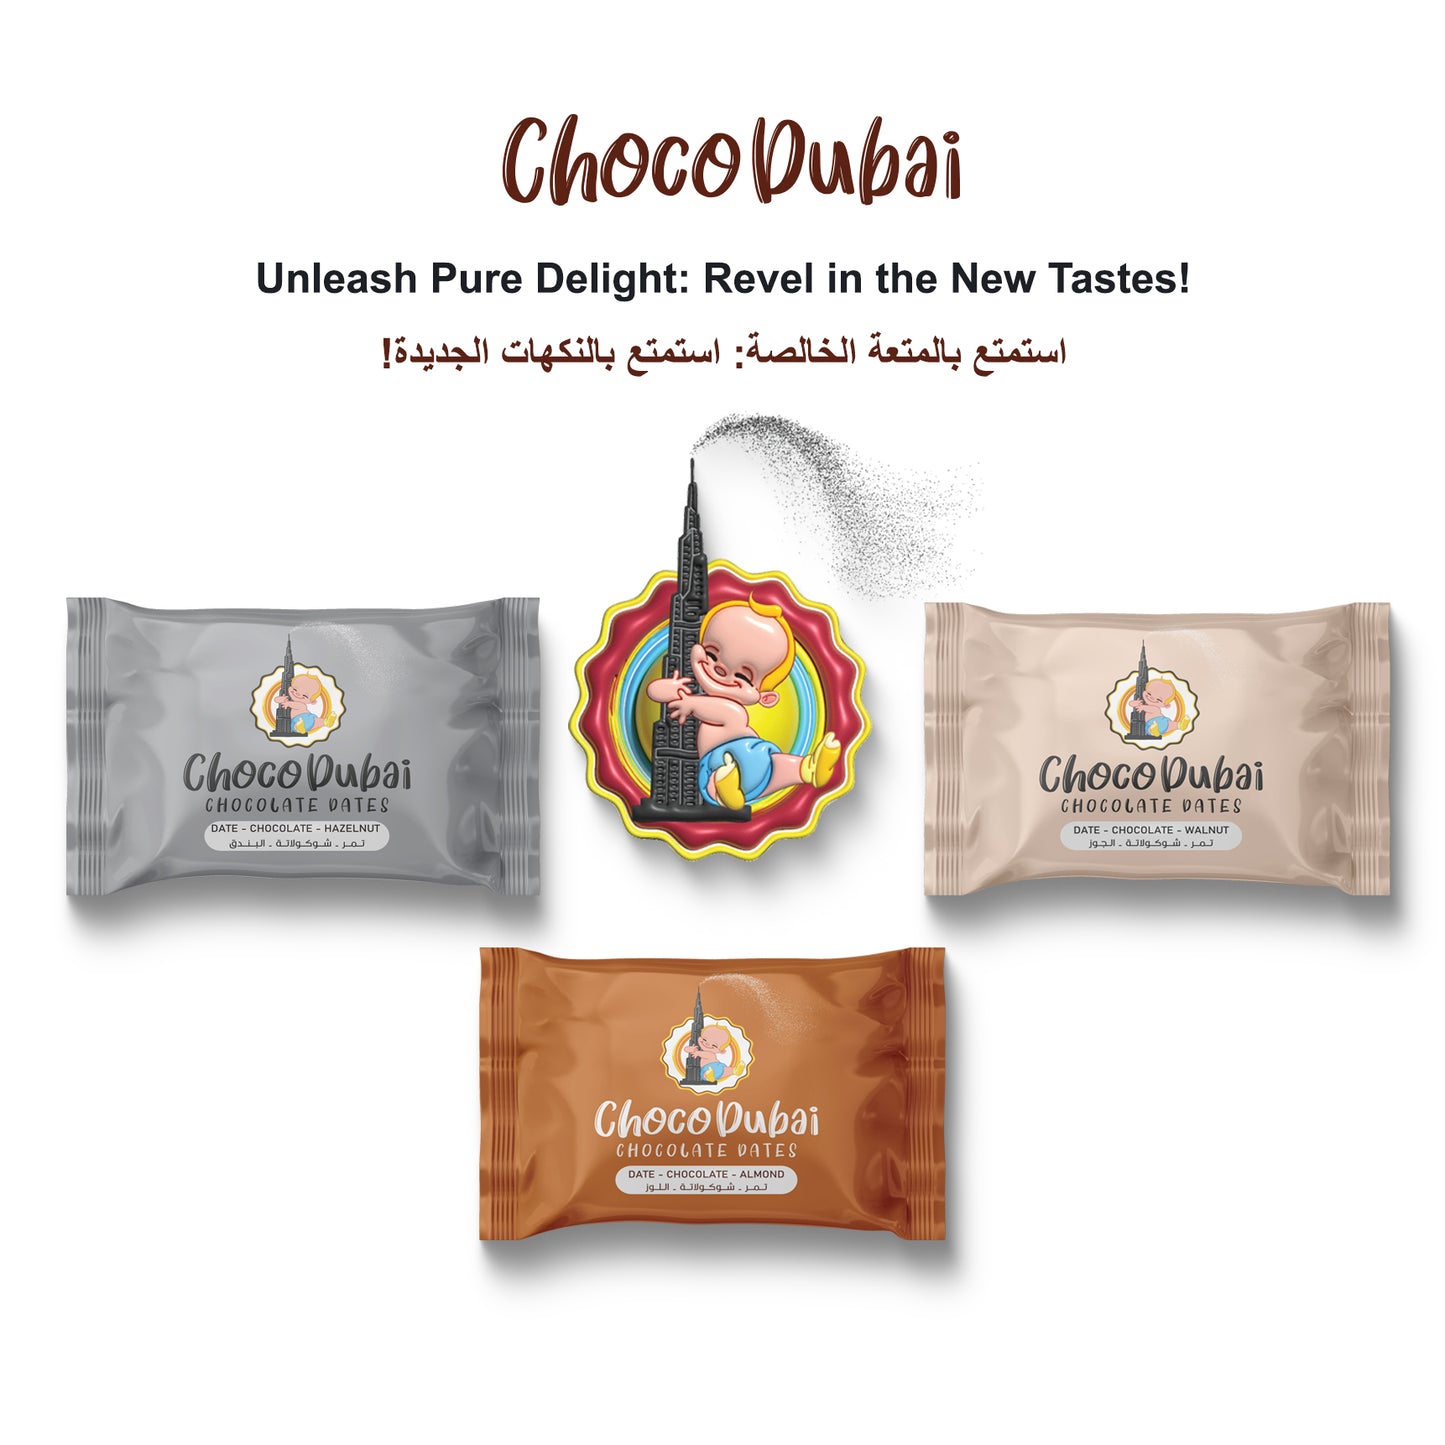 Choco Dubai 24 Packs of Full Coated Chocolate Dates Each 100 gm - SPECIAL OFFER!